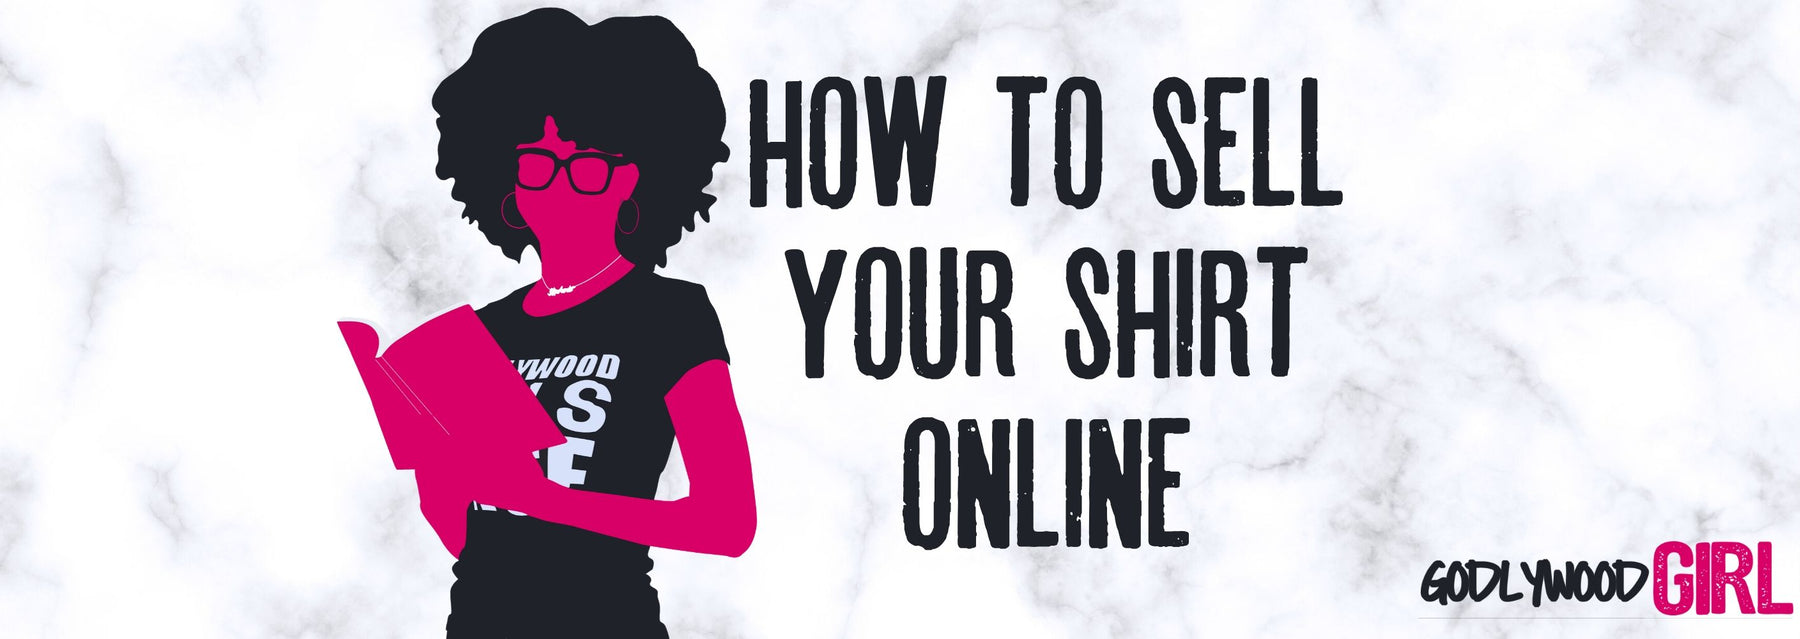 HOW TO SELL YOUR T-SHIRTS ONLINE USING INSTAGRAM (Christian T Shirt Business) | HOW TO